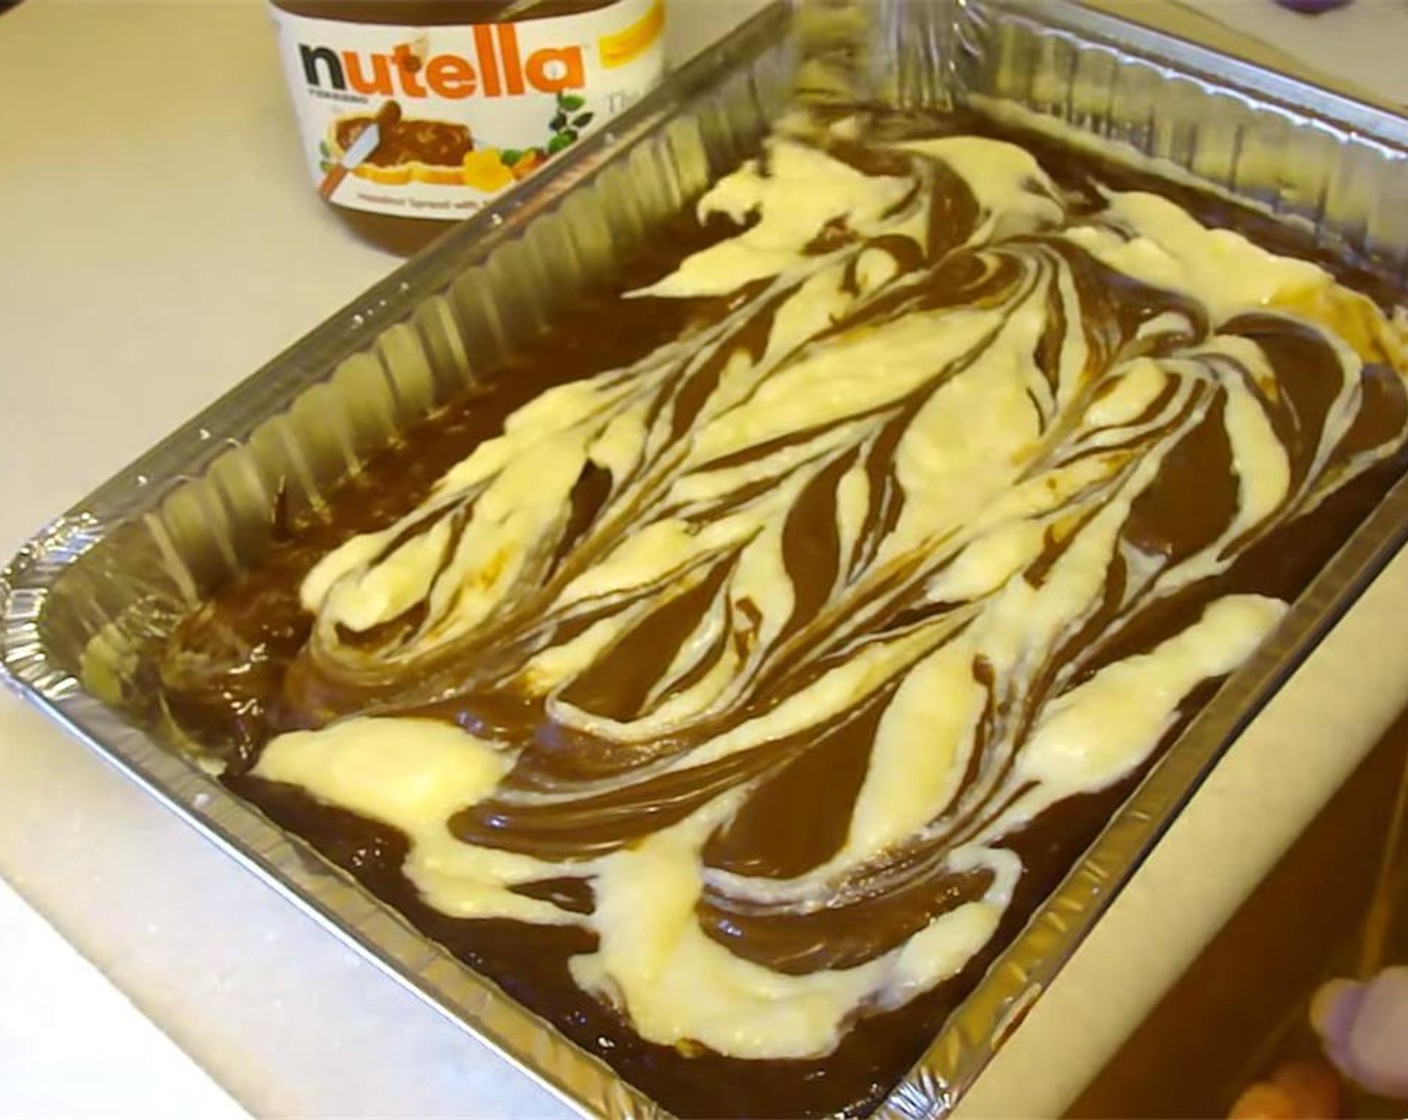 step 5 Pour evenly over the brownie batter. Drop Nutella® (1/3 cup) by the spoonful on top as well, and make swirls in the batter with a knife. Bake for 25-30 minutes. Let cool for at least 10 minutes before cutting into squares.